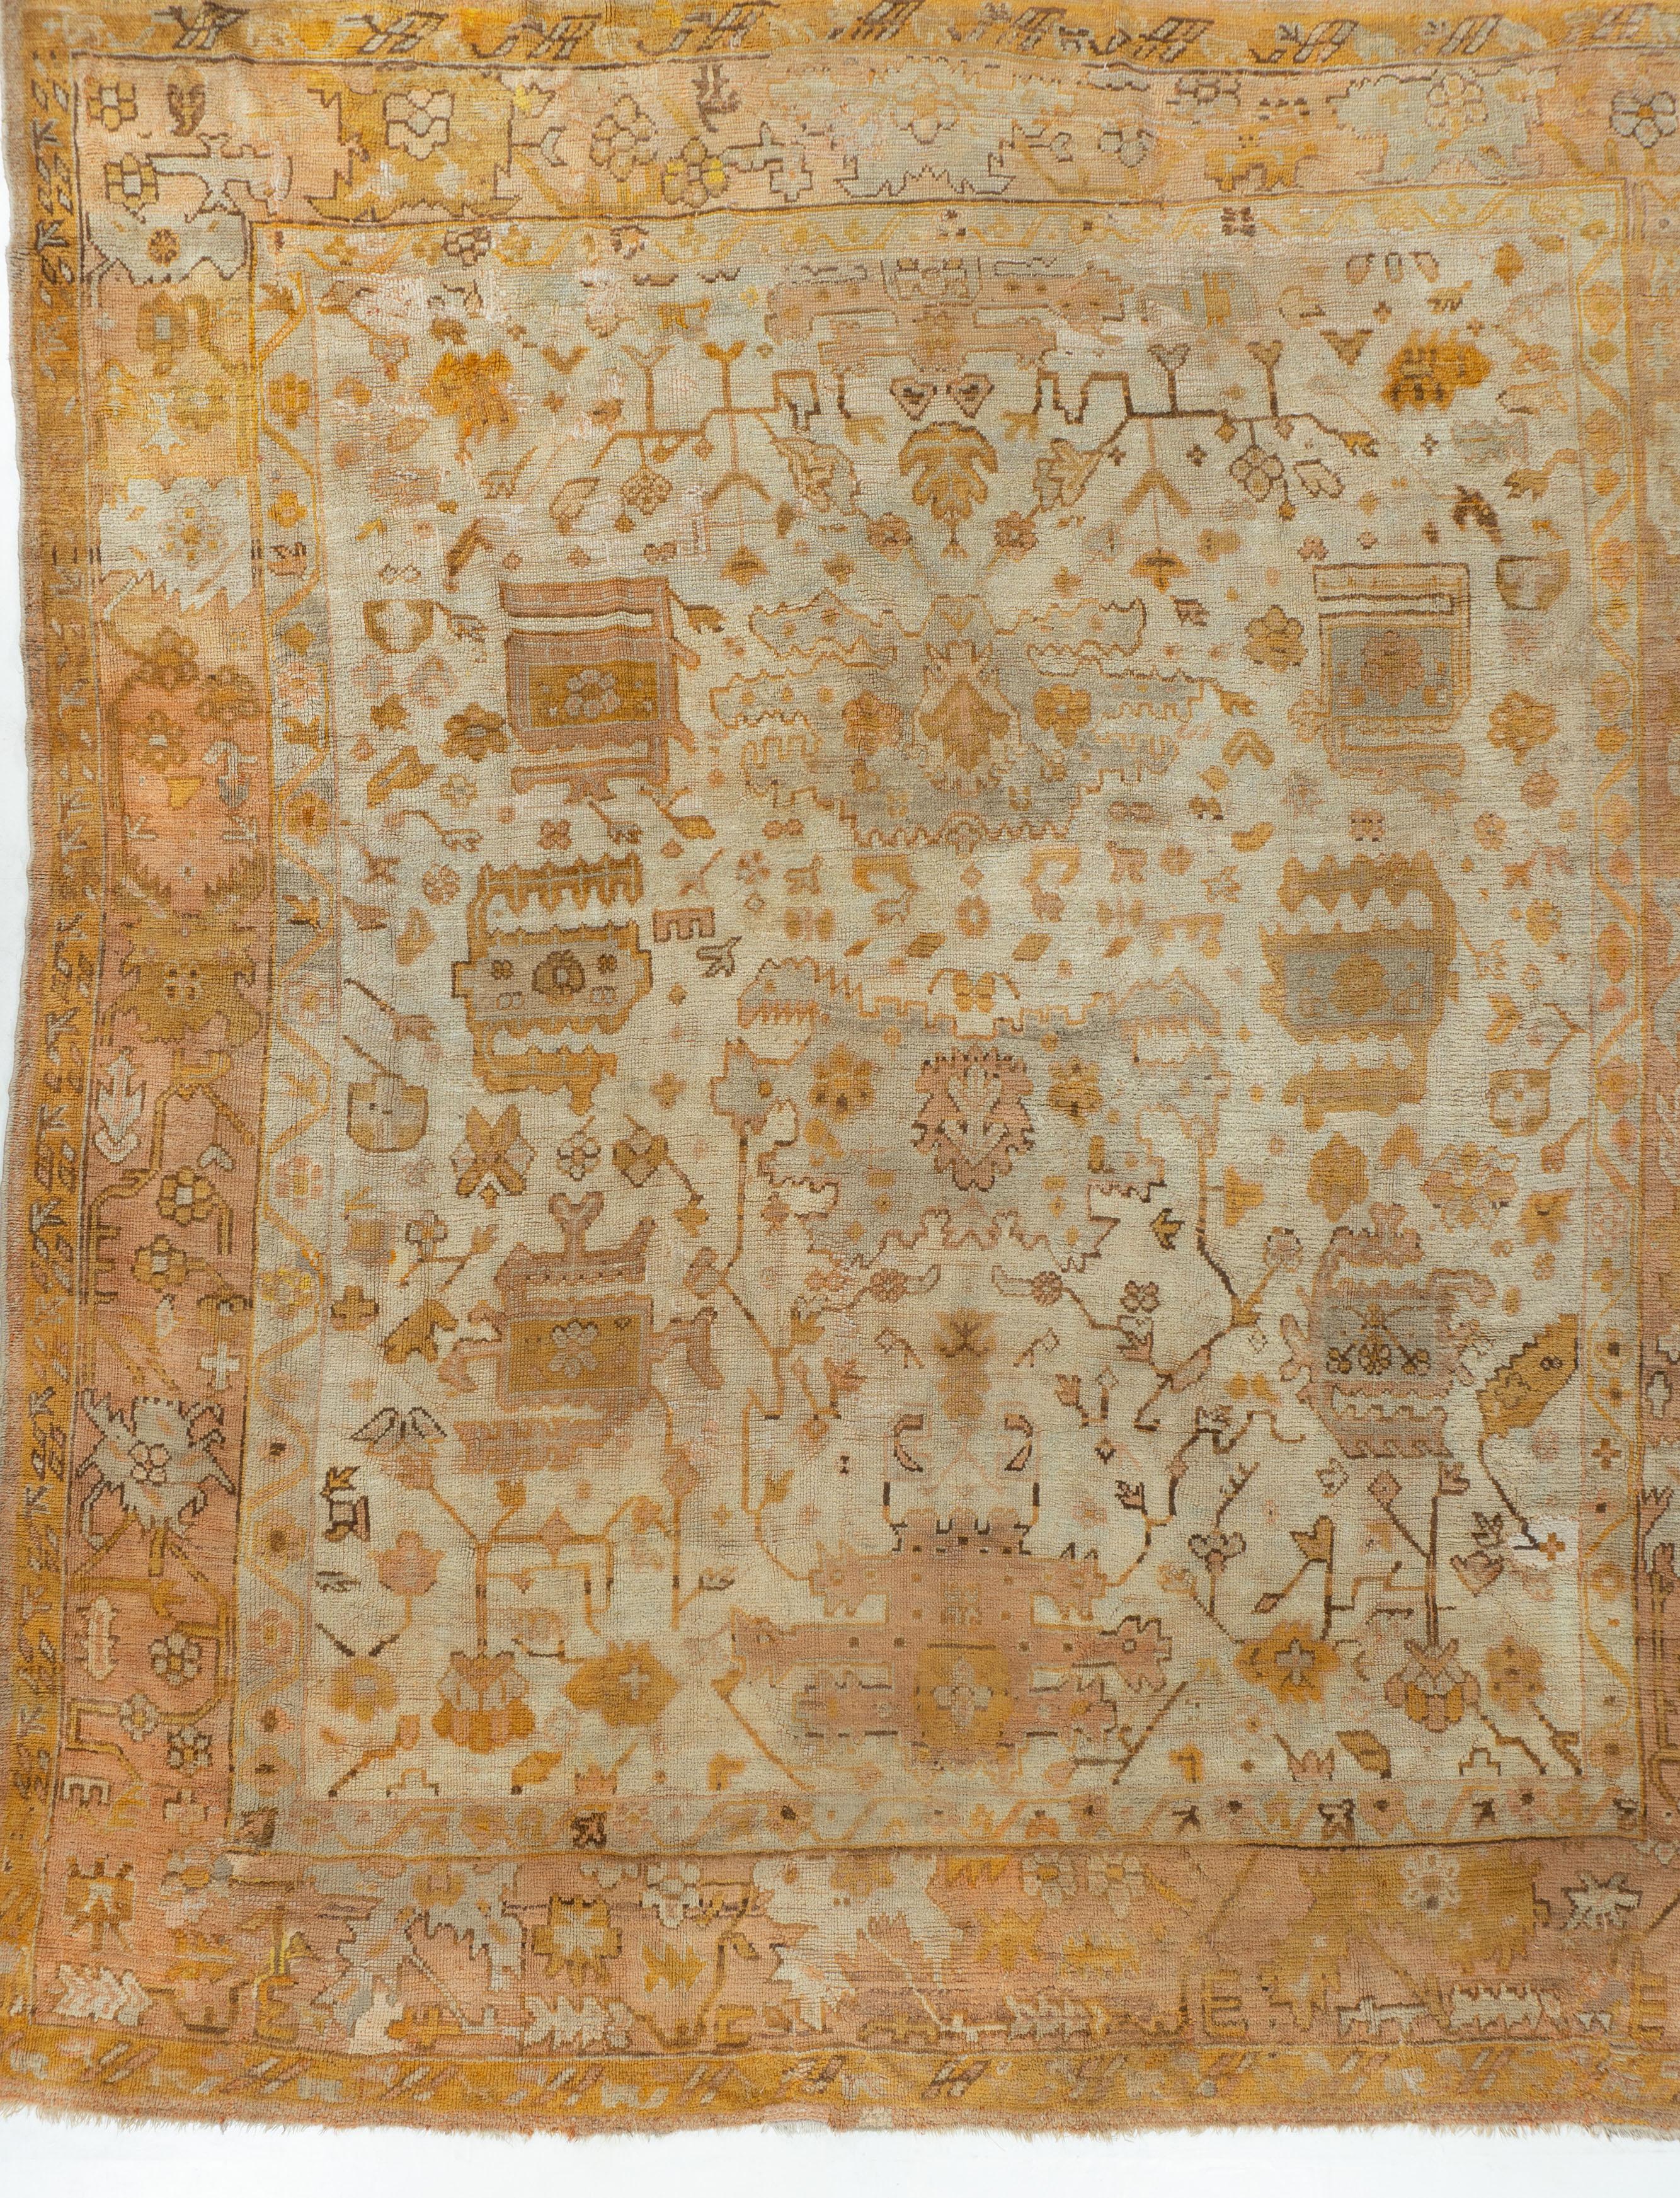 Antique Turkish Oushak Rug 11'5 X 13'2. Even today, Oushak rugs are still the first choice of professional interior designers. Sometimes this is because when grading Oushak carpets, carpet connoisseurs will not only look at the overall quality of